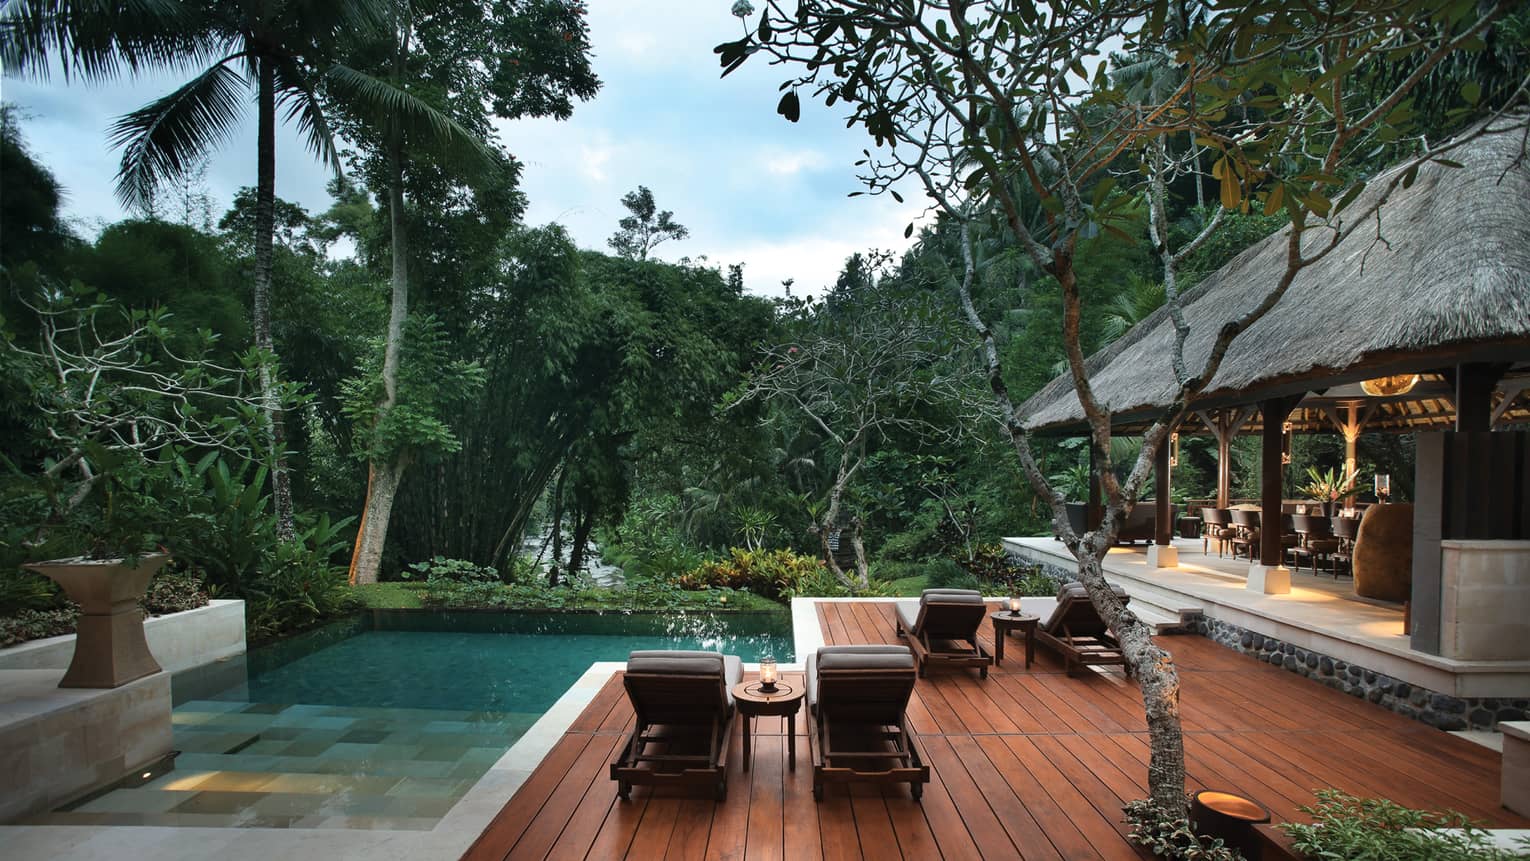 Outdoor patio and pool of the Royal Villa, surrounded by trees, dining room under thatched roof